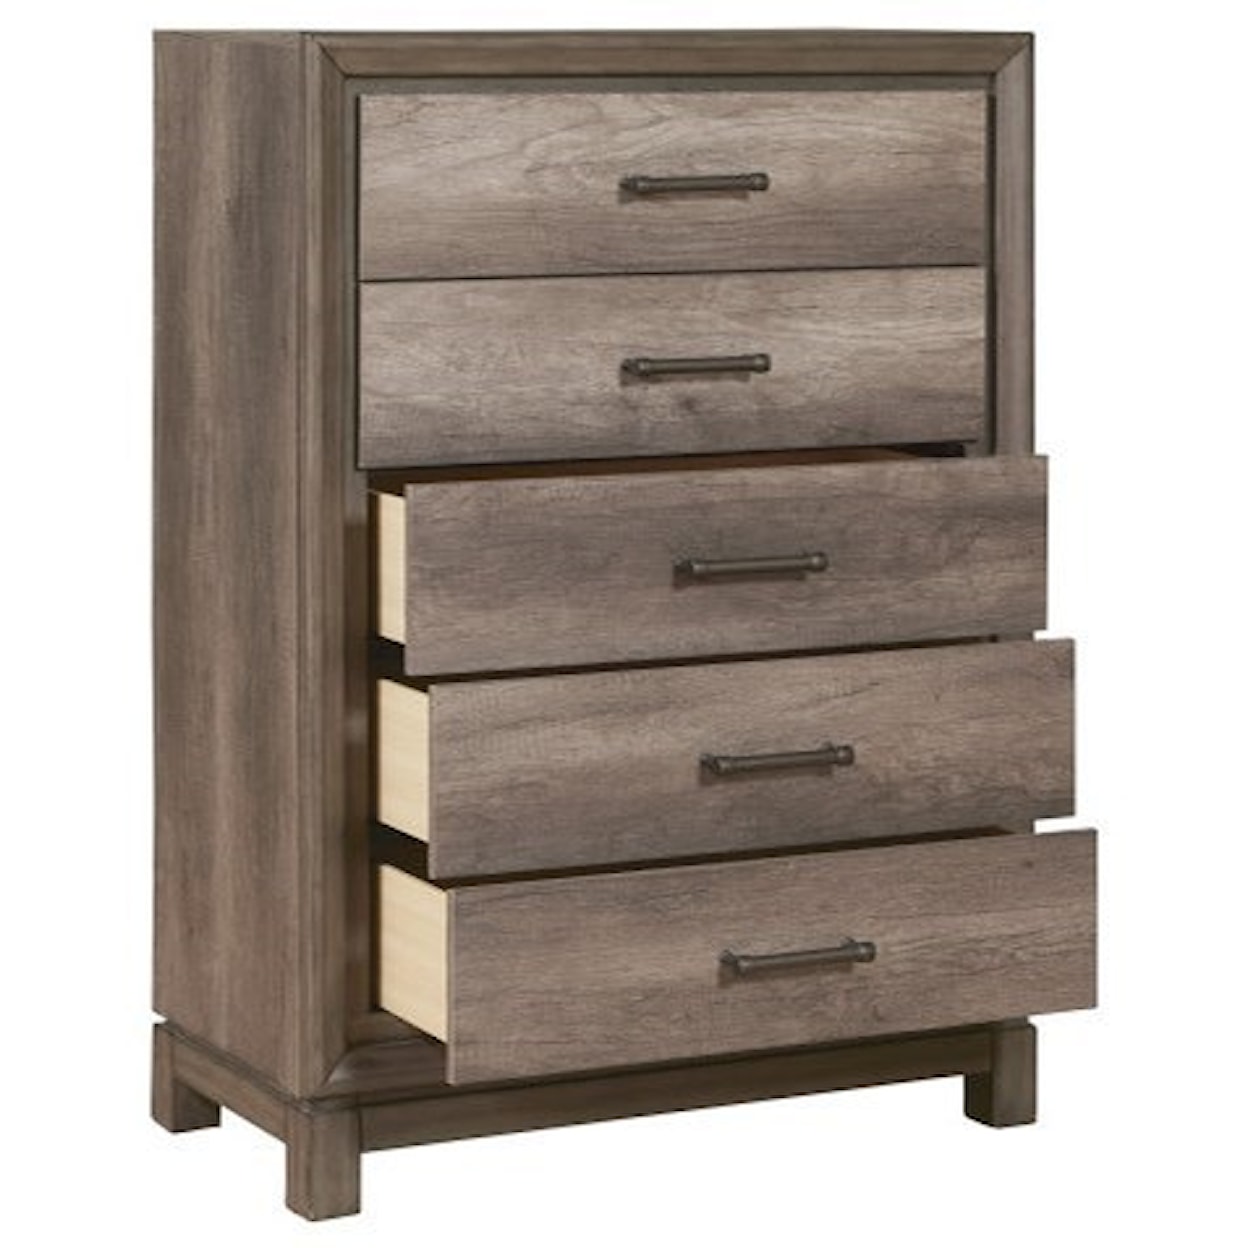 Samuel Lawrence Hanover Square Chest of Drawers